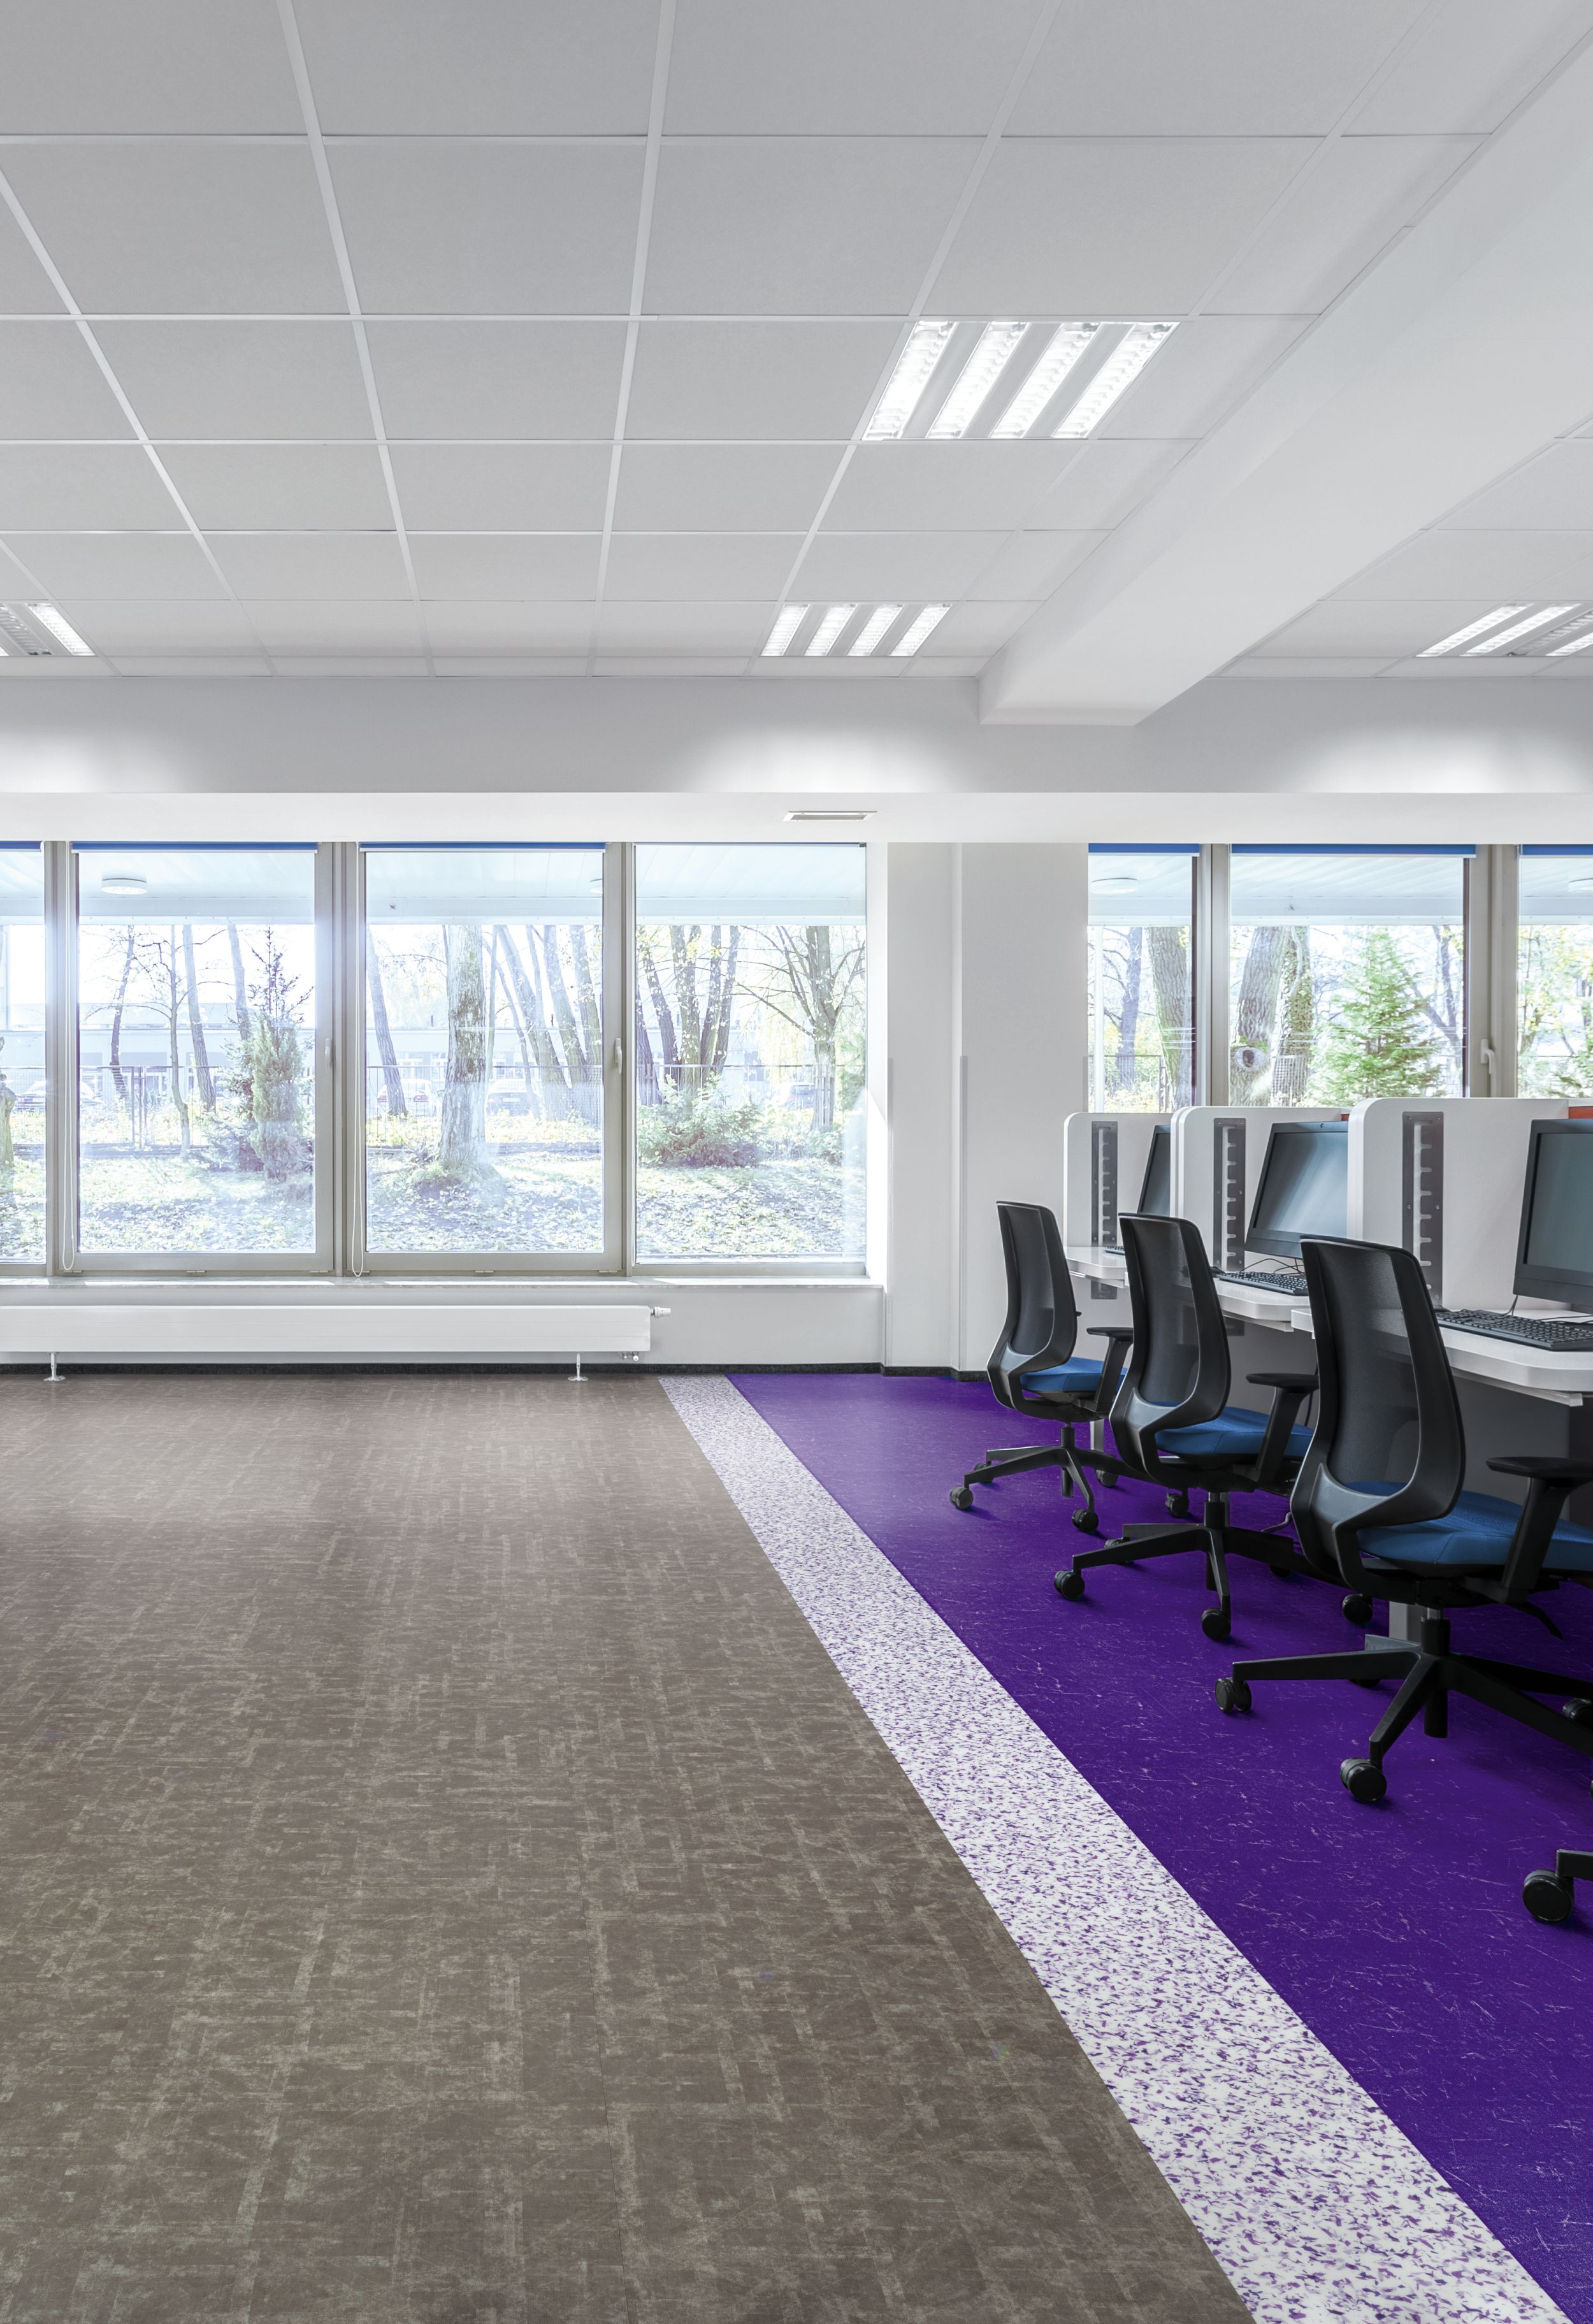 Interface Scorpio, Aries and Walk on By LVT in office setting with cubicles and chairs imagen número 5